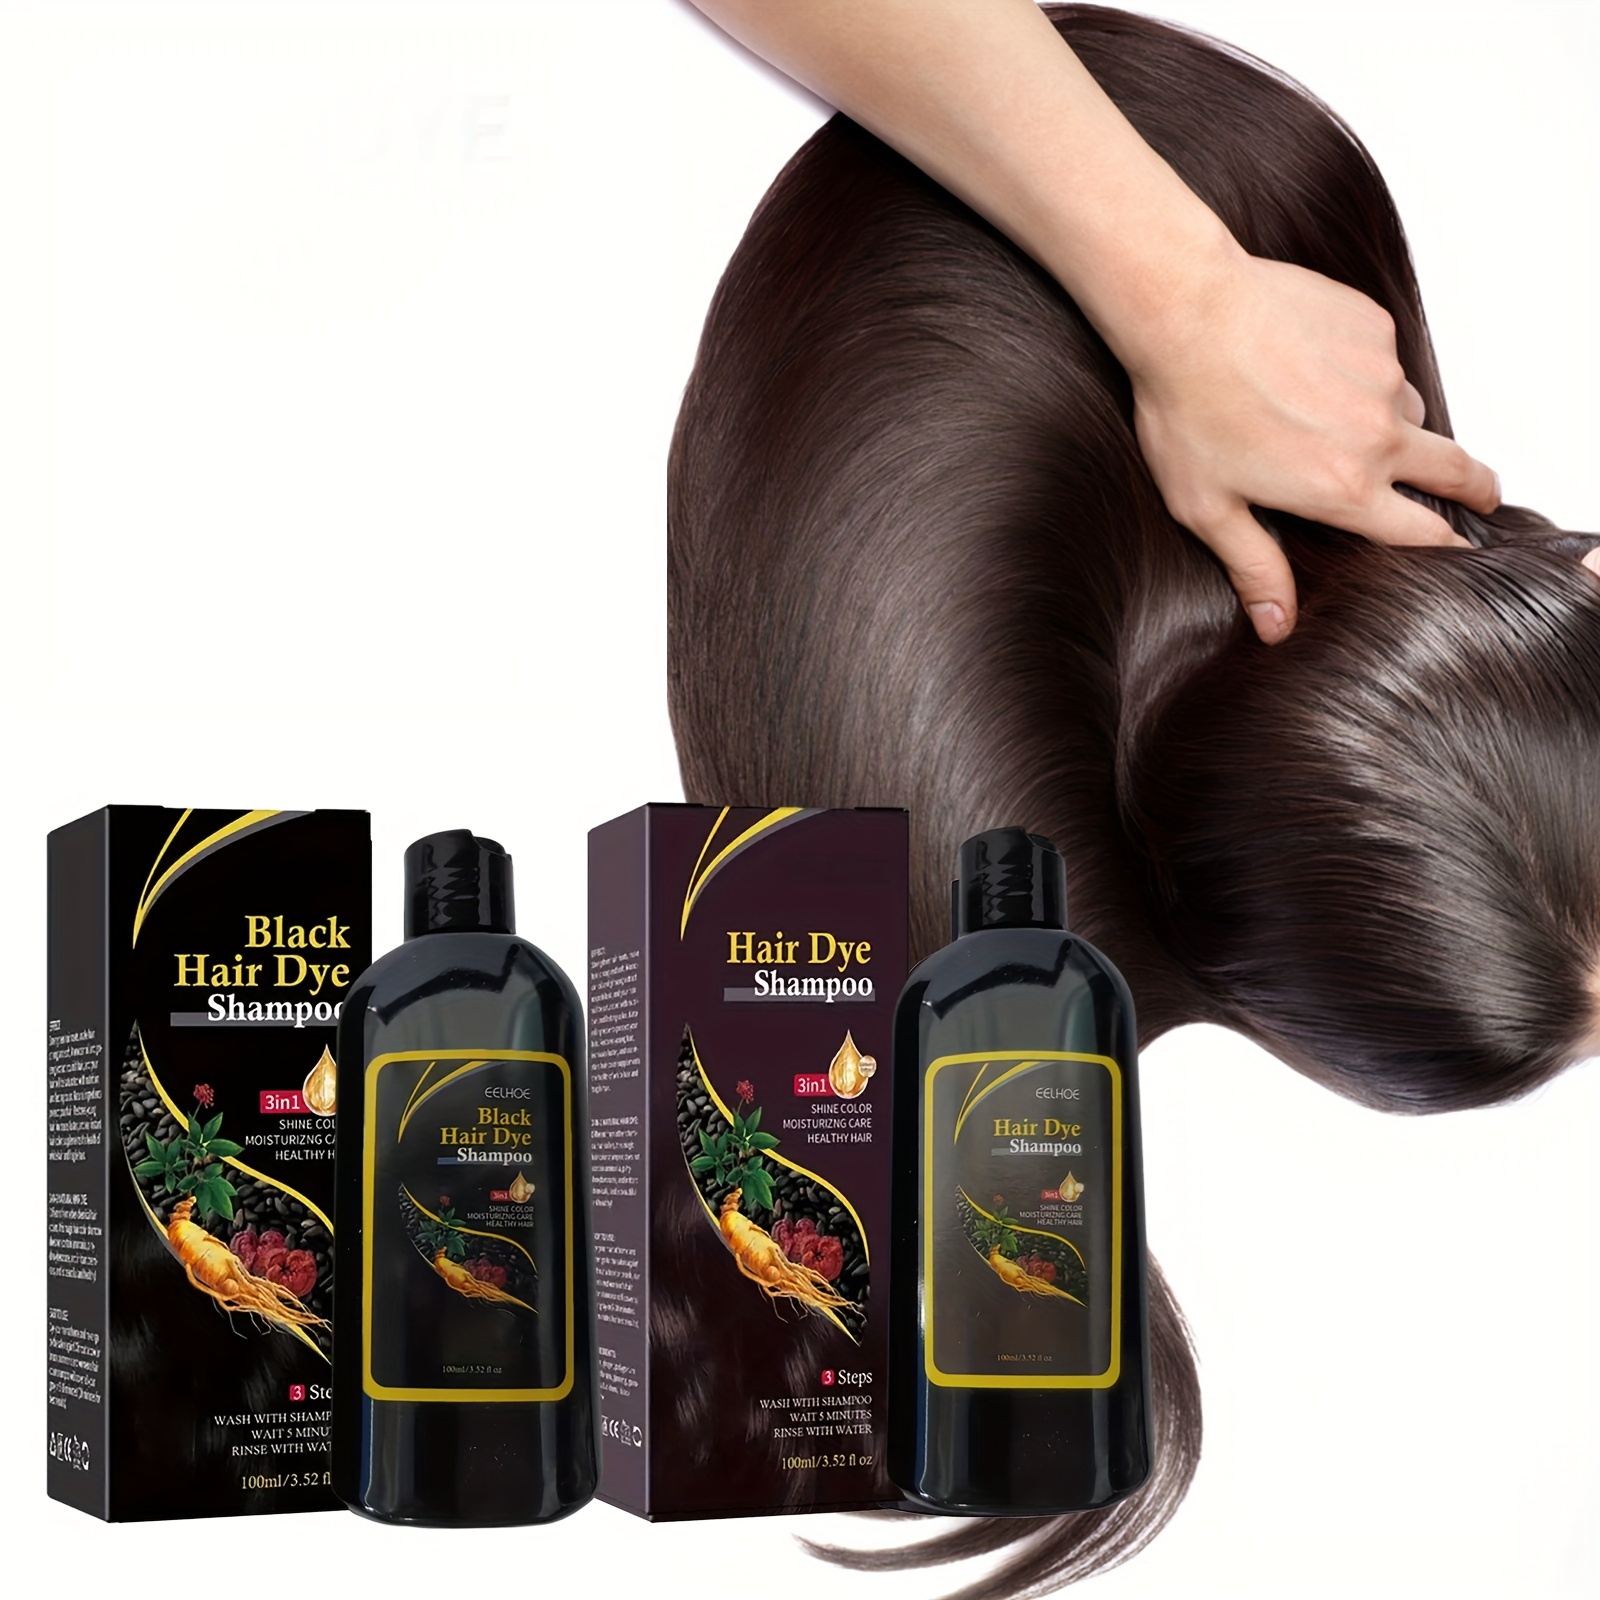 

Hair Dye Shampoo, Instant Hair Color Shampoo For Gray Hair, Grey Coverage, Easy To Use